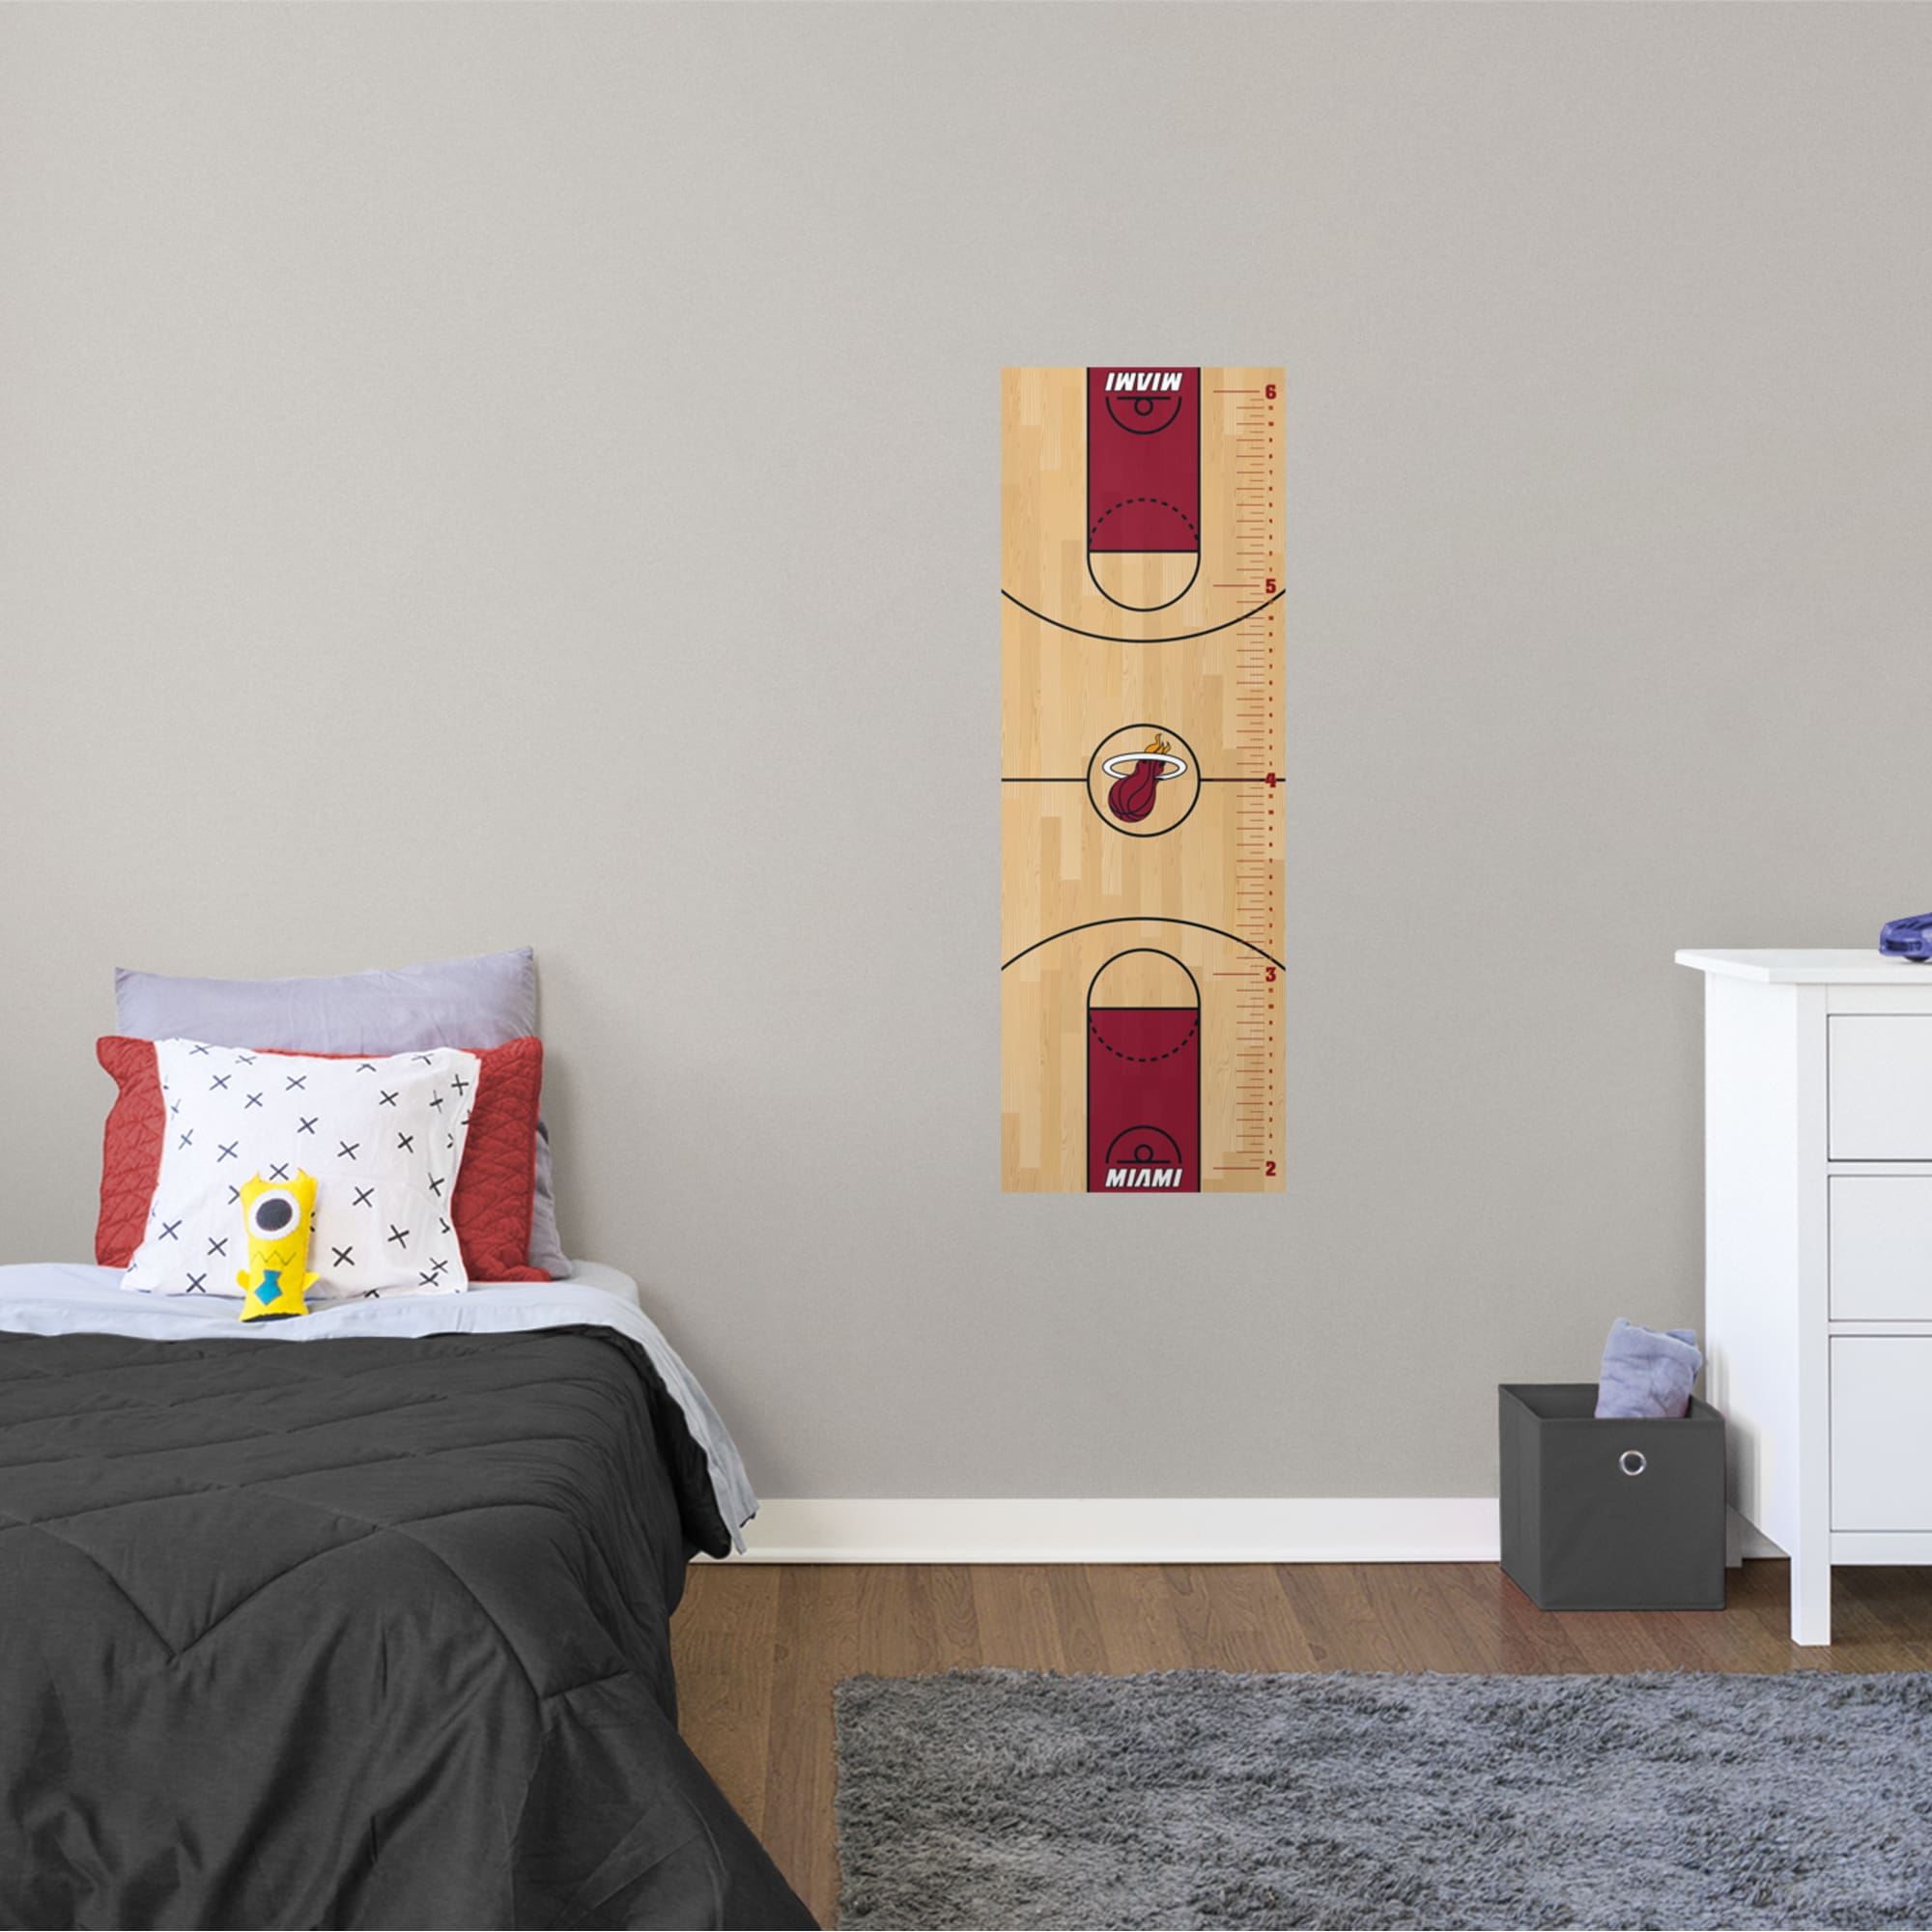 Miami Heat: Growth Chart - Officially Licensed NBA Removable Wall Decal 17.5"W x 51.0"H by Fathead | Vinyl